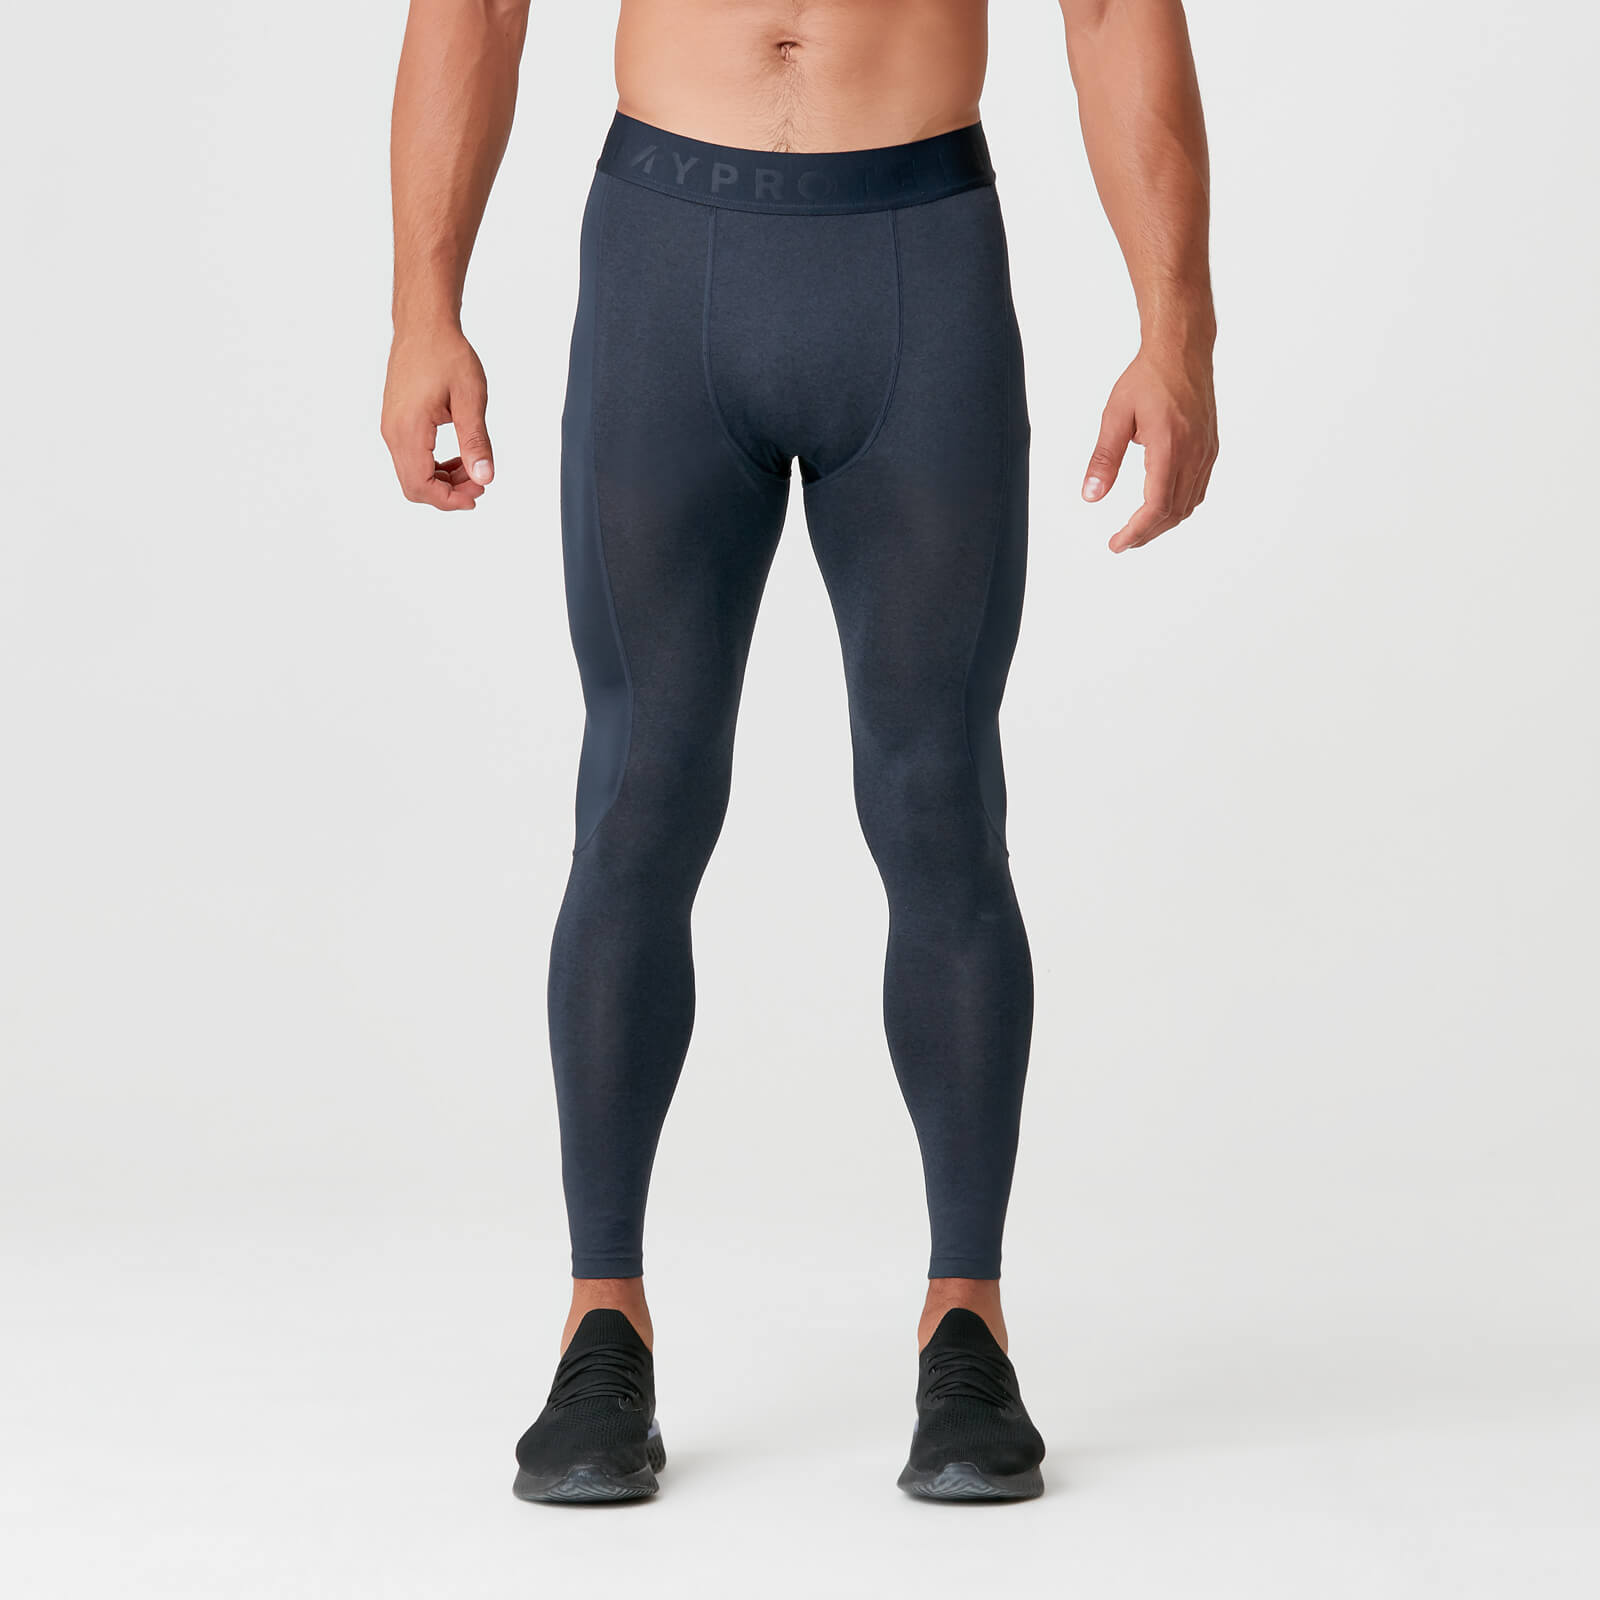 MP Men's Charge Compression Tights - Navy Marl - S